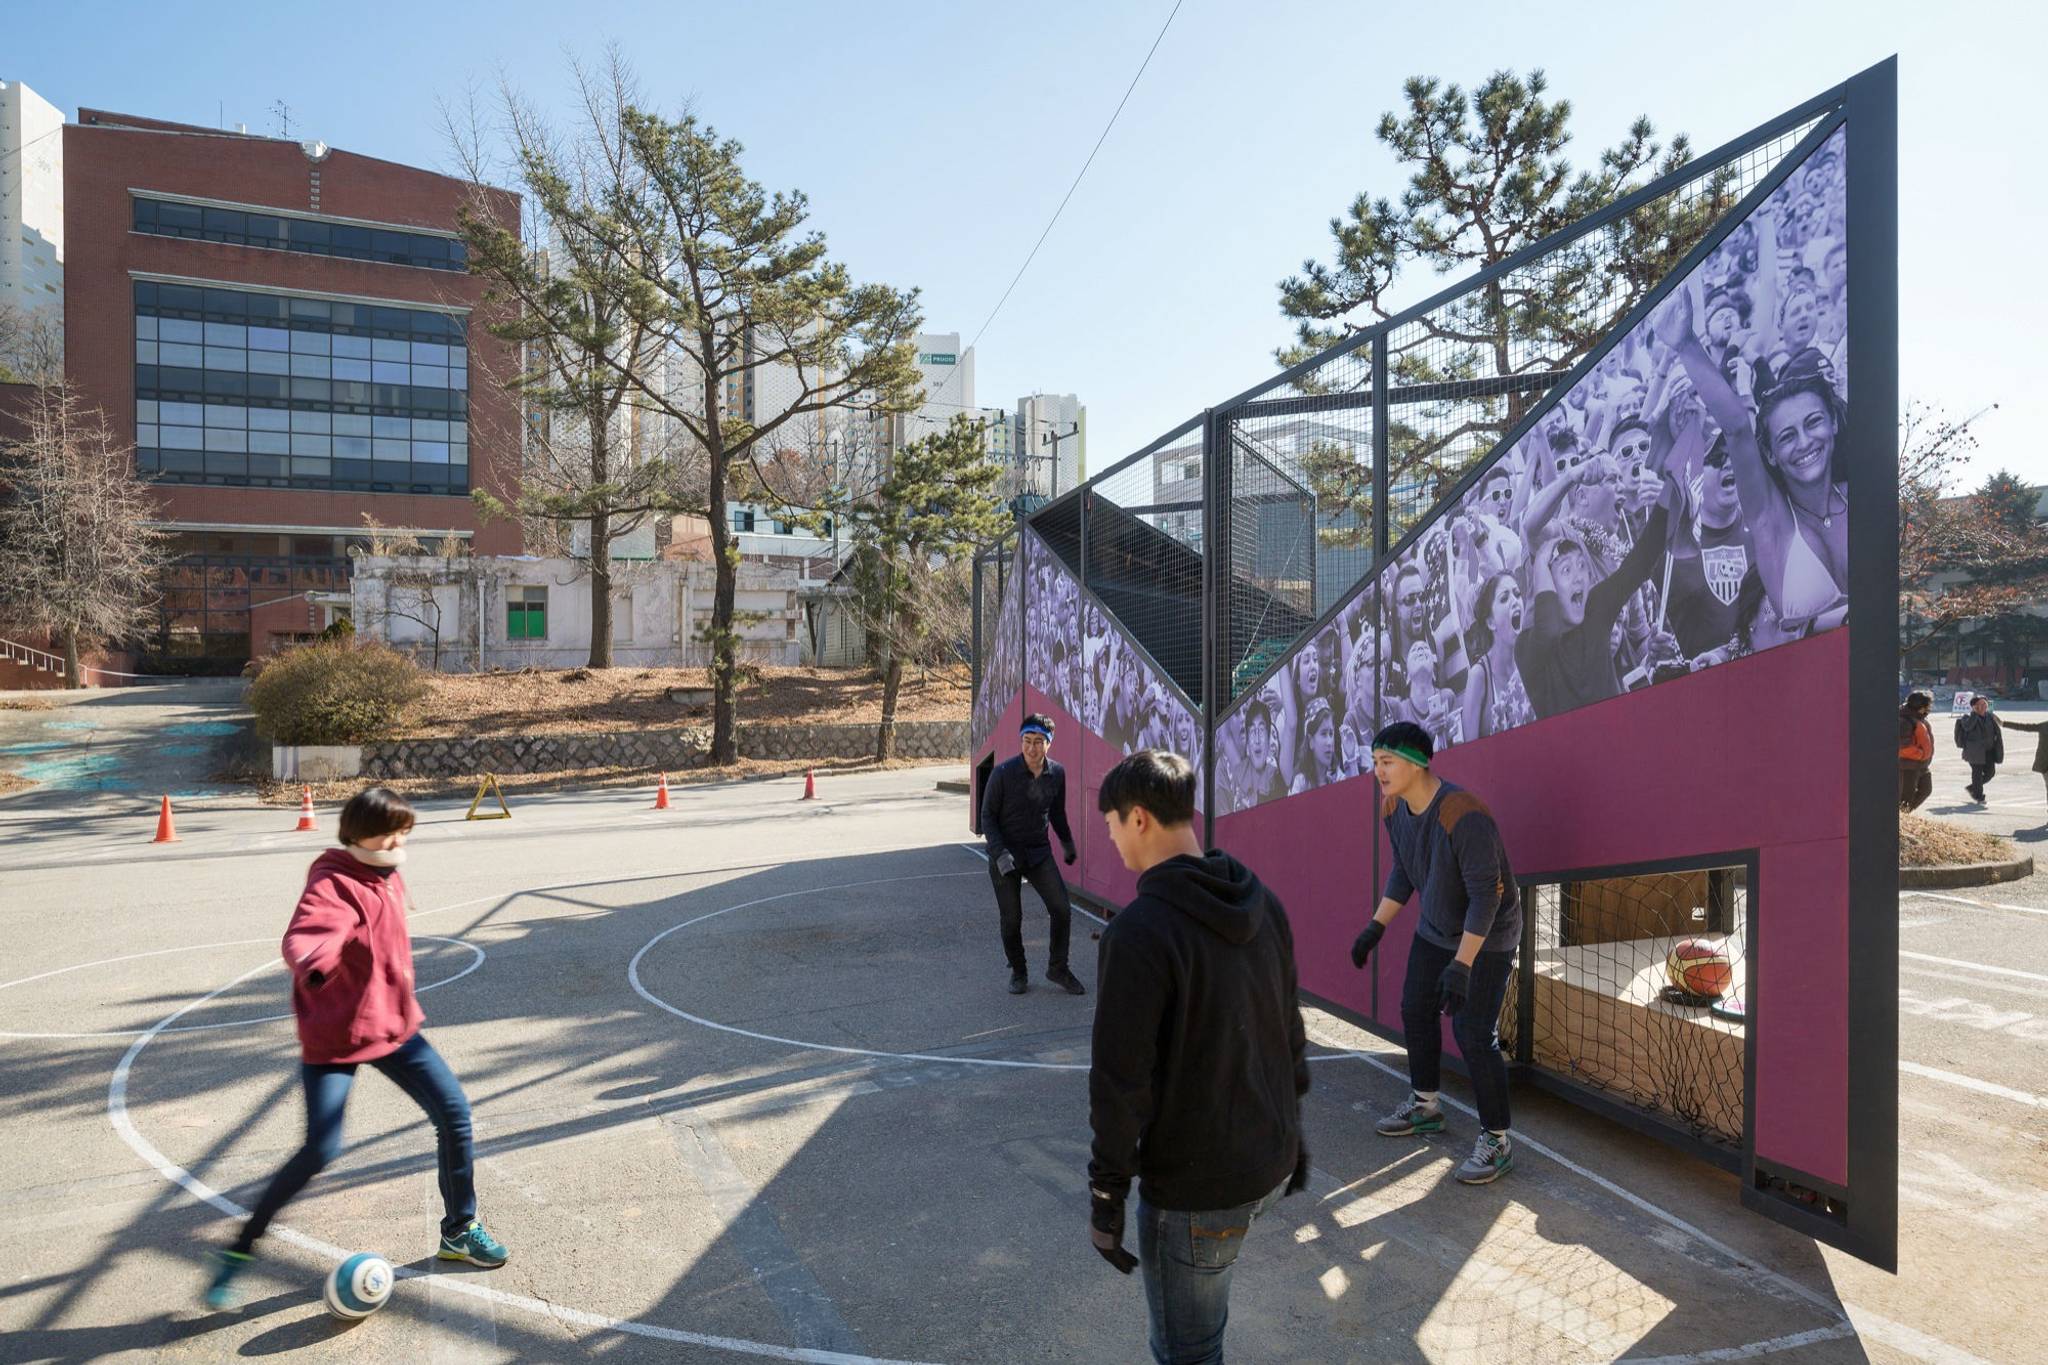 Fold-up Playgrounds for active Urbanites